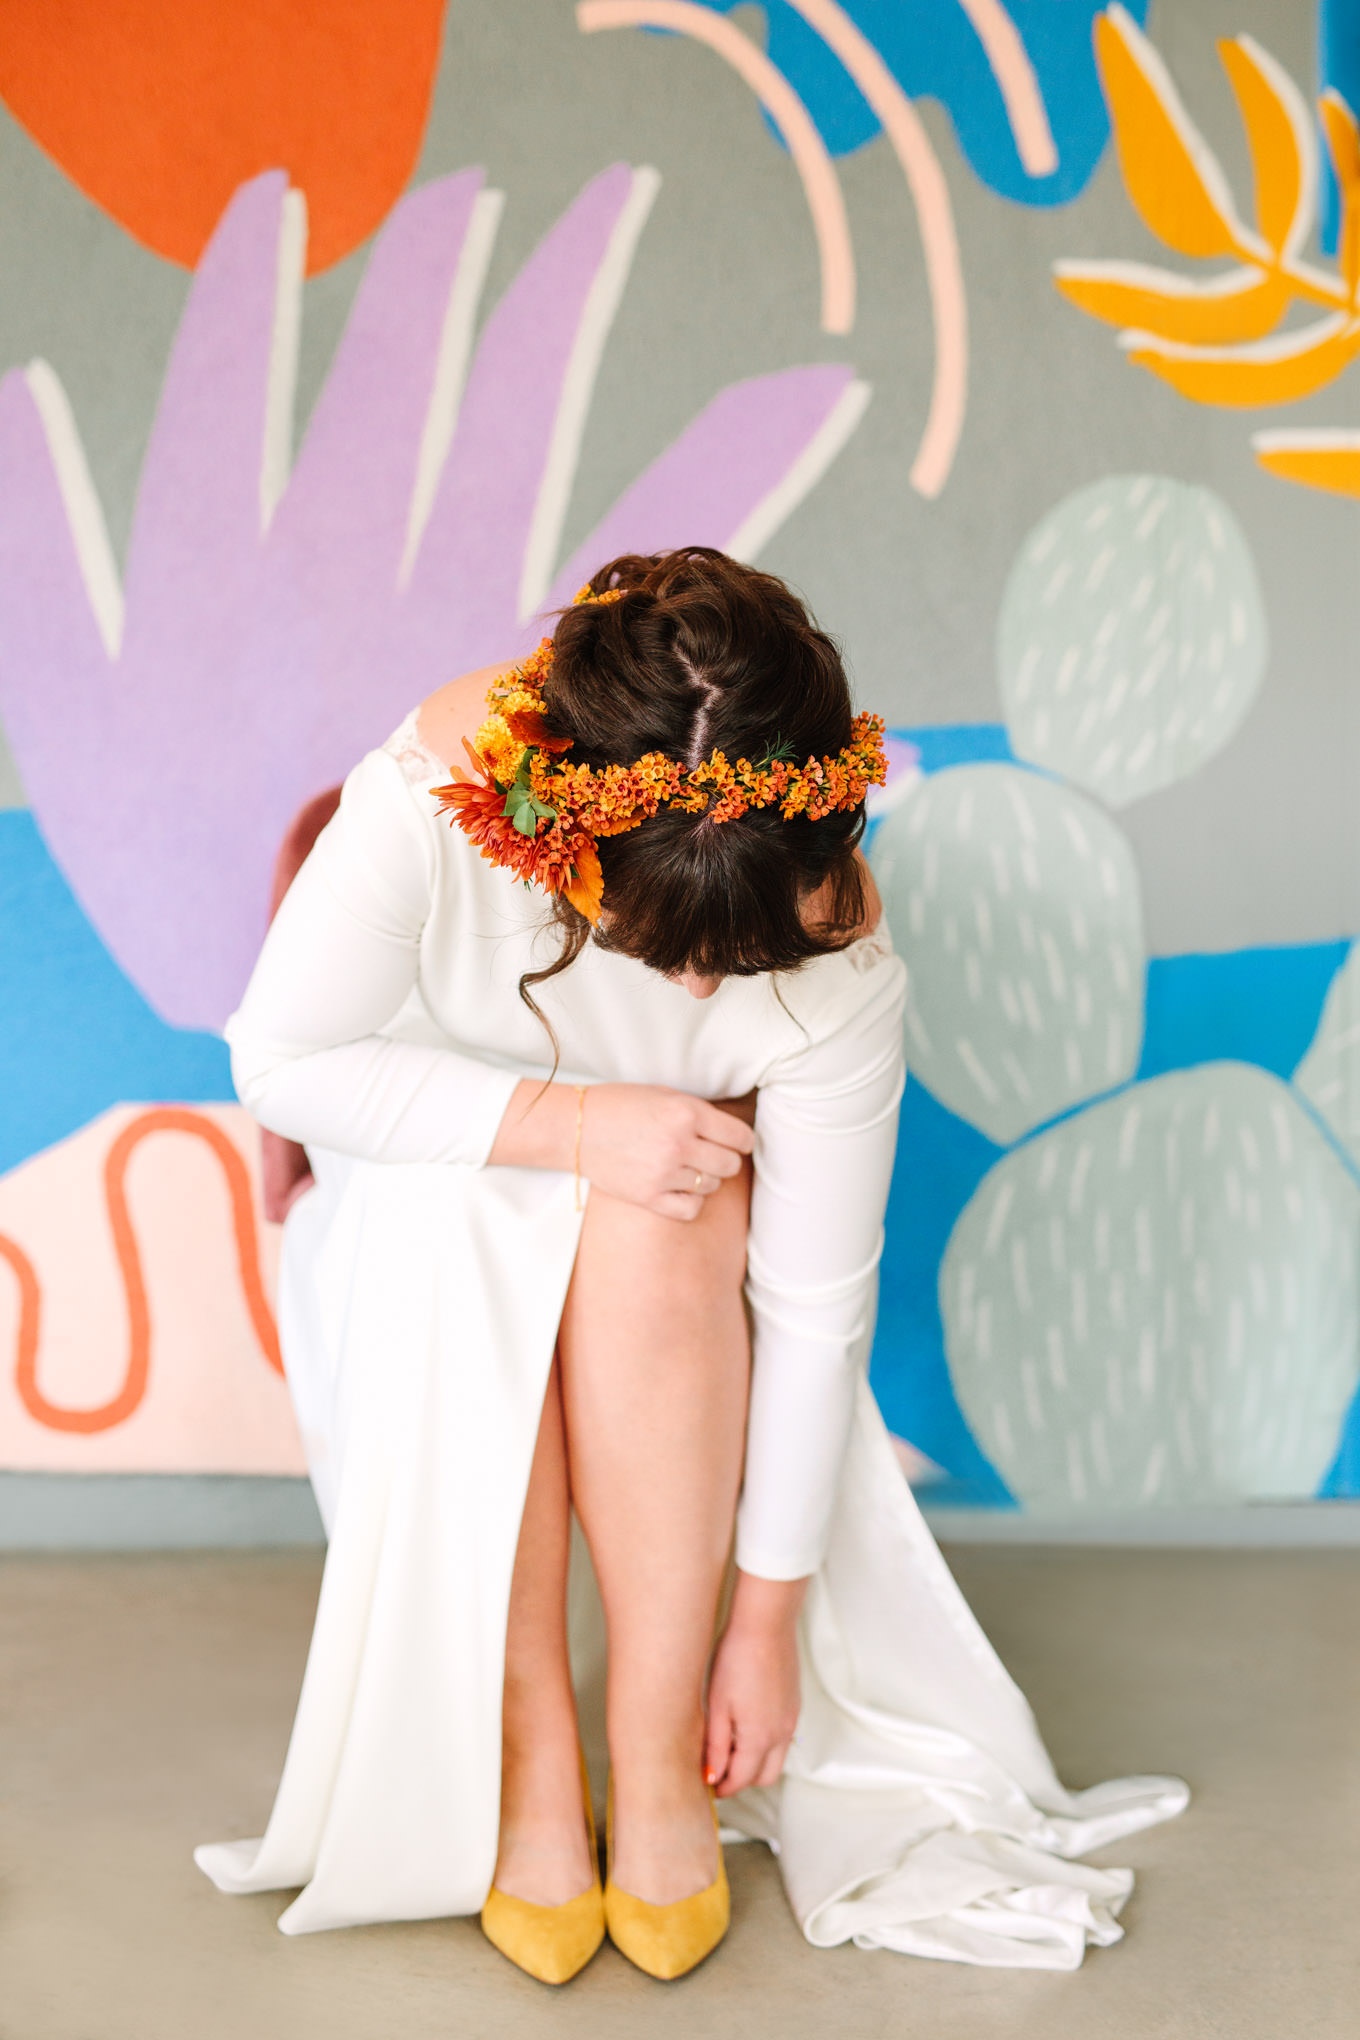 Bride putting on fun. unique wedding shoes | Vibrant backyard micro wedding featured on Green Wedding Shoes | Colorful LA wedding photography | #losangeleswedding #backyardwedding #microwedding #laweddingphotographer Source: Mary Costa Photography | Los Angeles